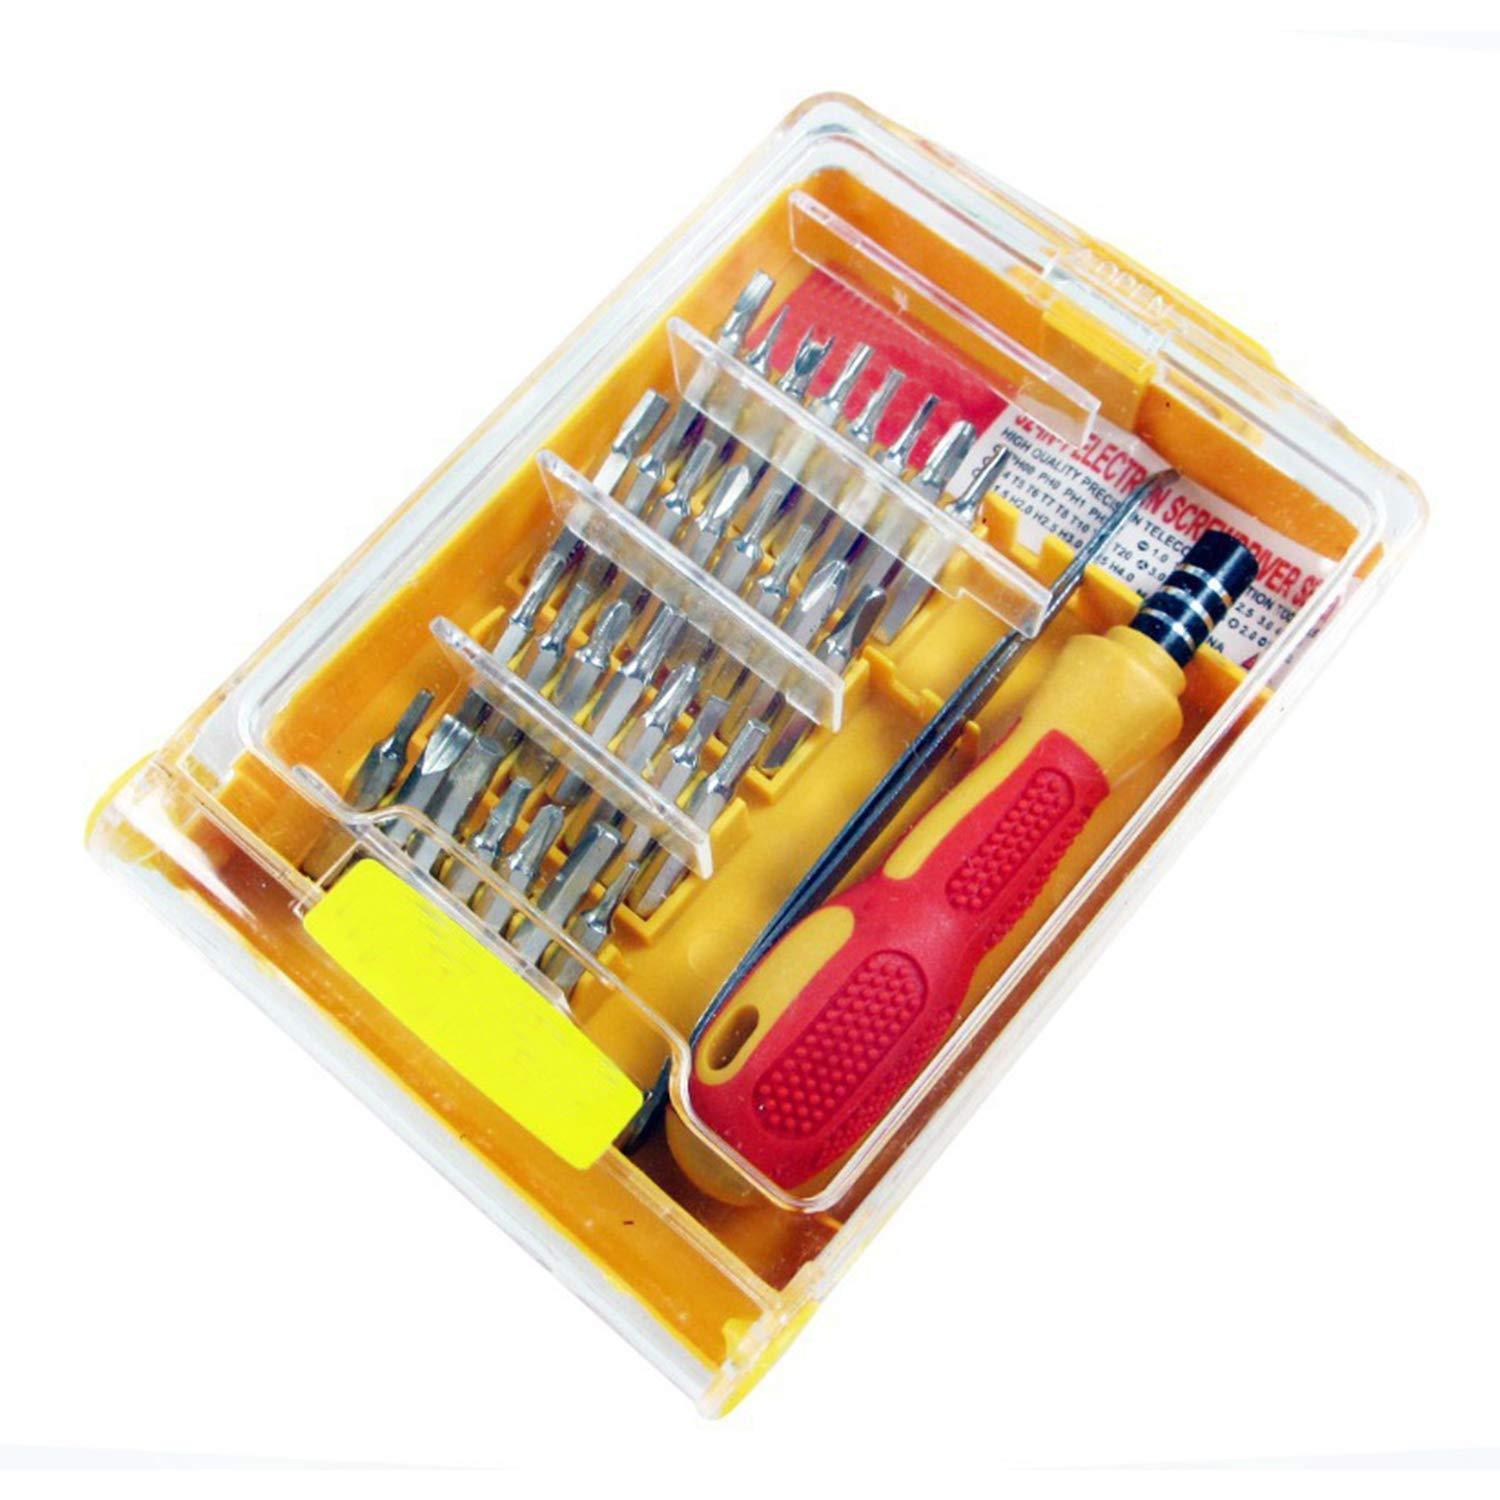 0430 Screwdriver Set  32 in 1 with Magnetic Holder - SkyShopy